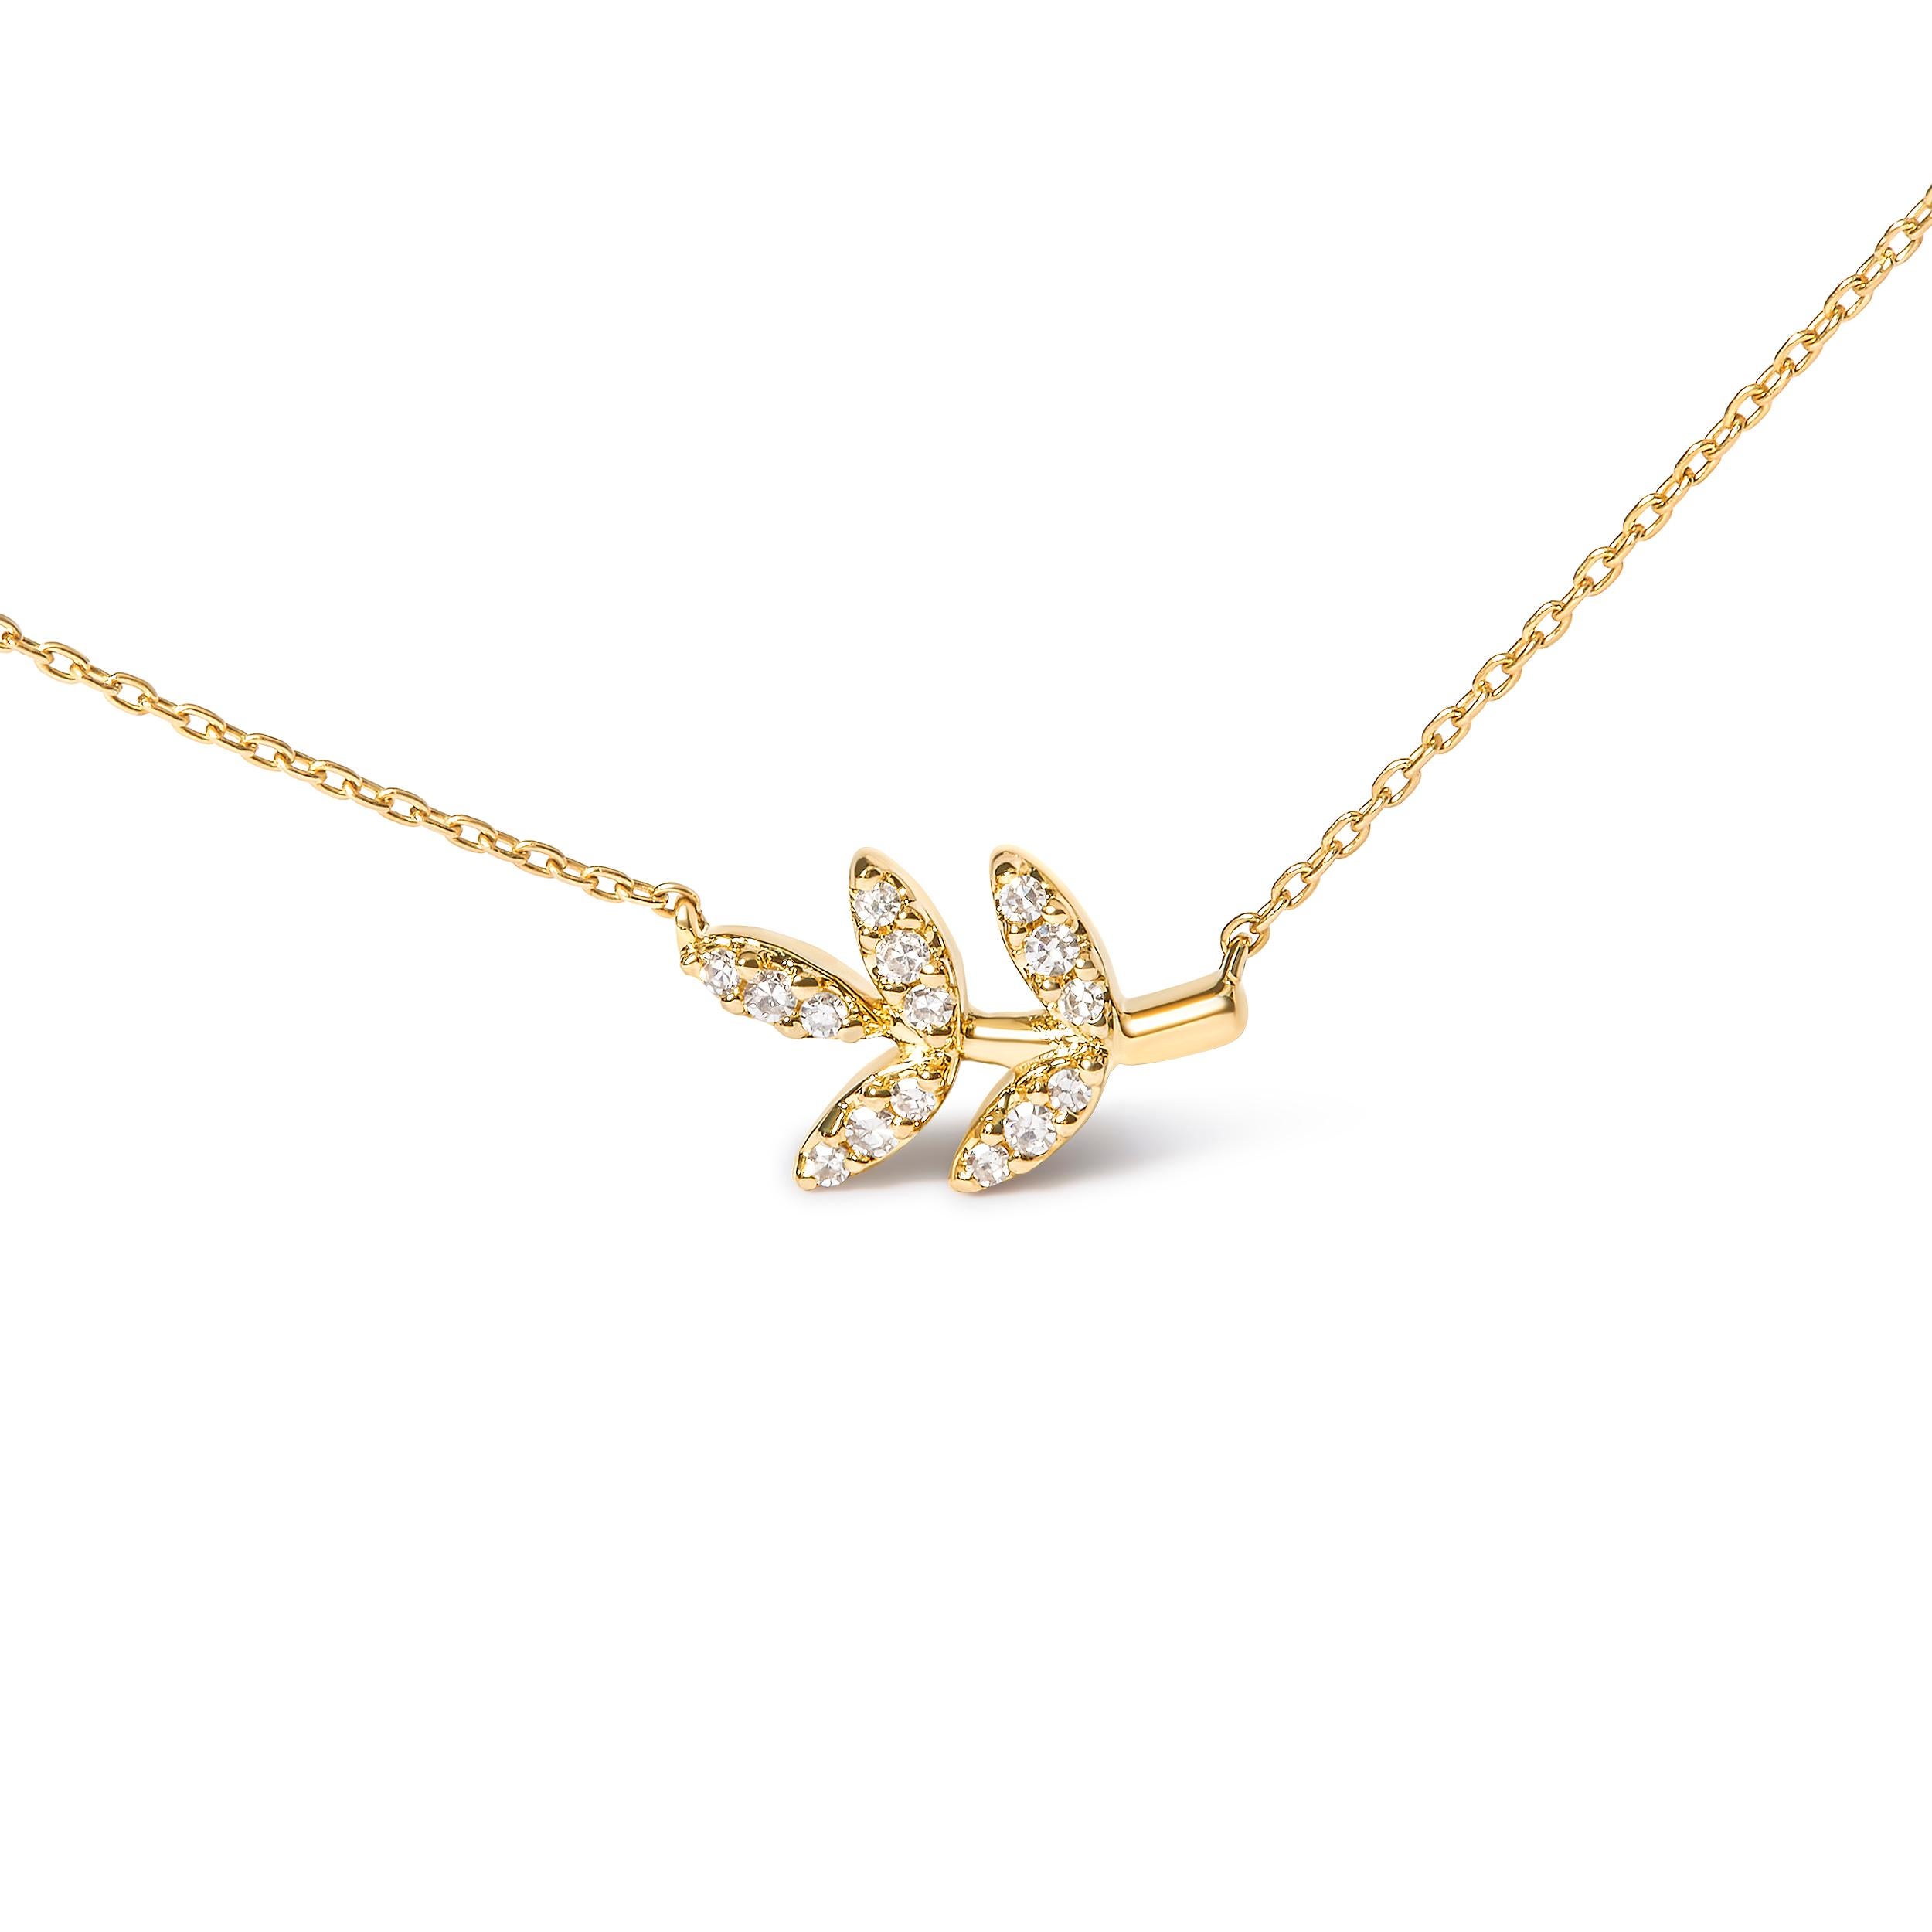 Introducing a mesmerizing masterpiece that will leave you captivated. Crafted in 10K yellow gold, this enchanting pendant necklace features a stunning leaf and branch design, symbolizing growth and harmony. Adorned with 15 round diamonds, totaling